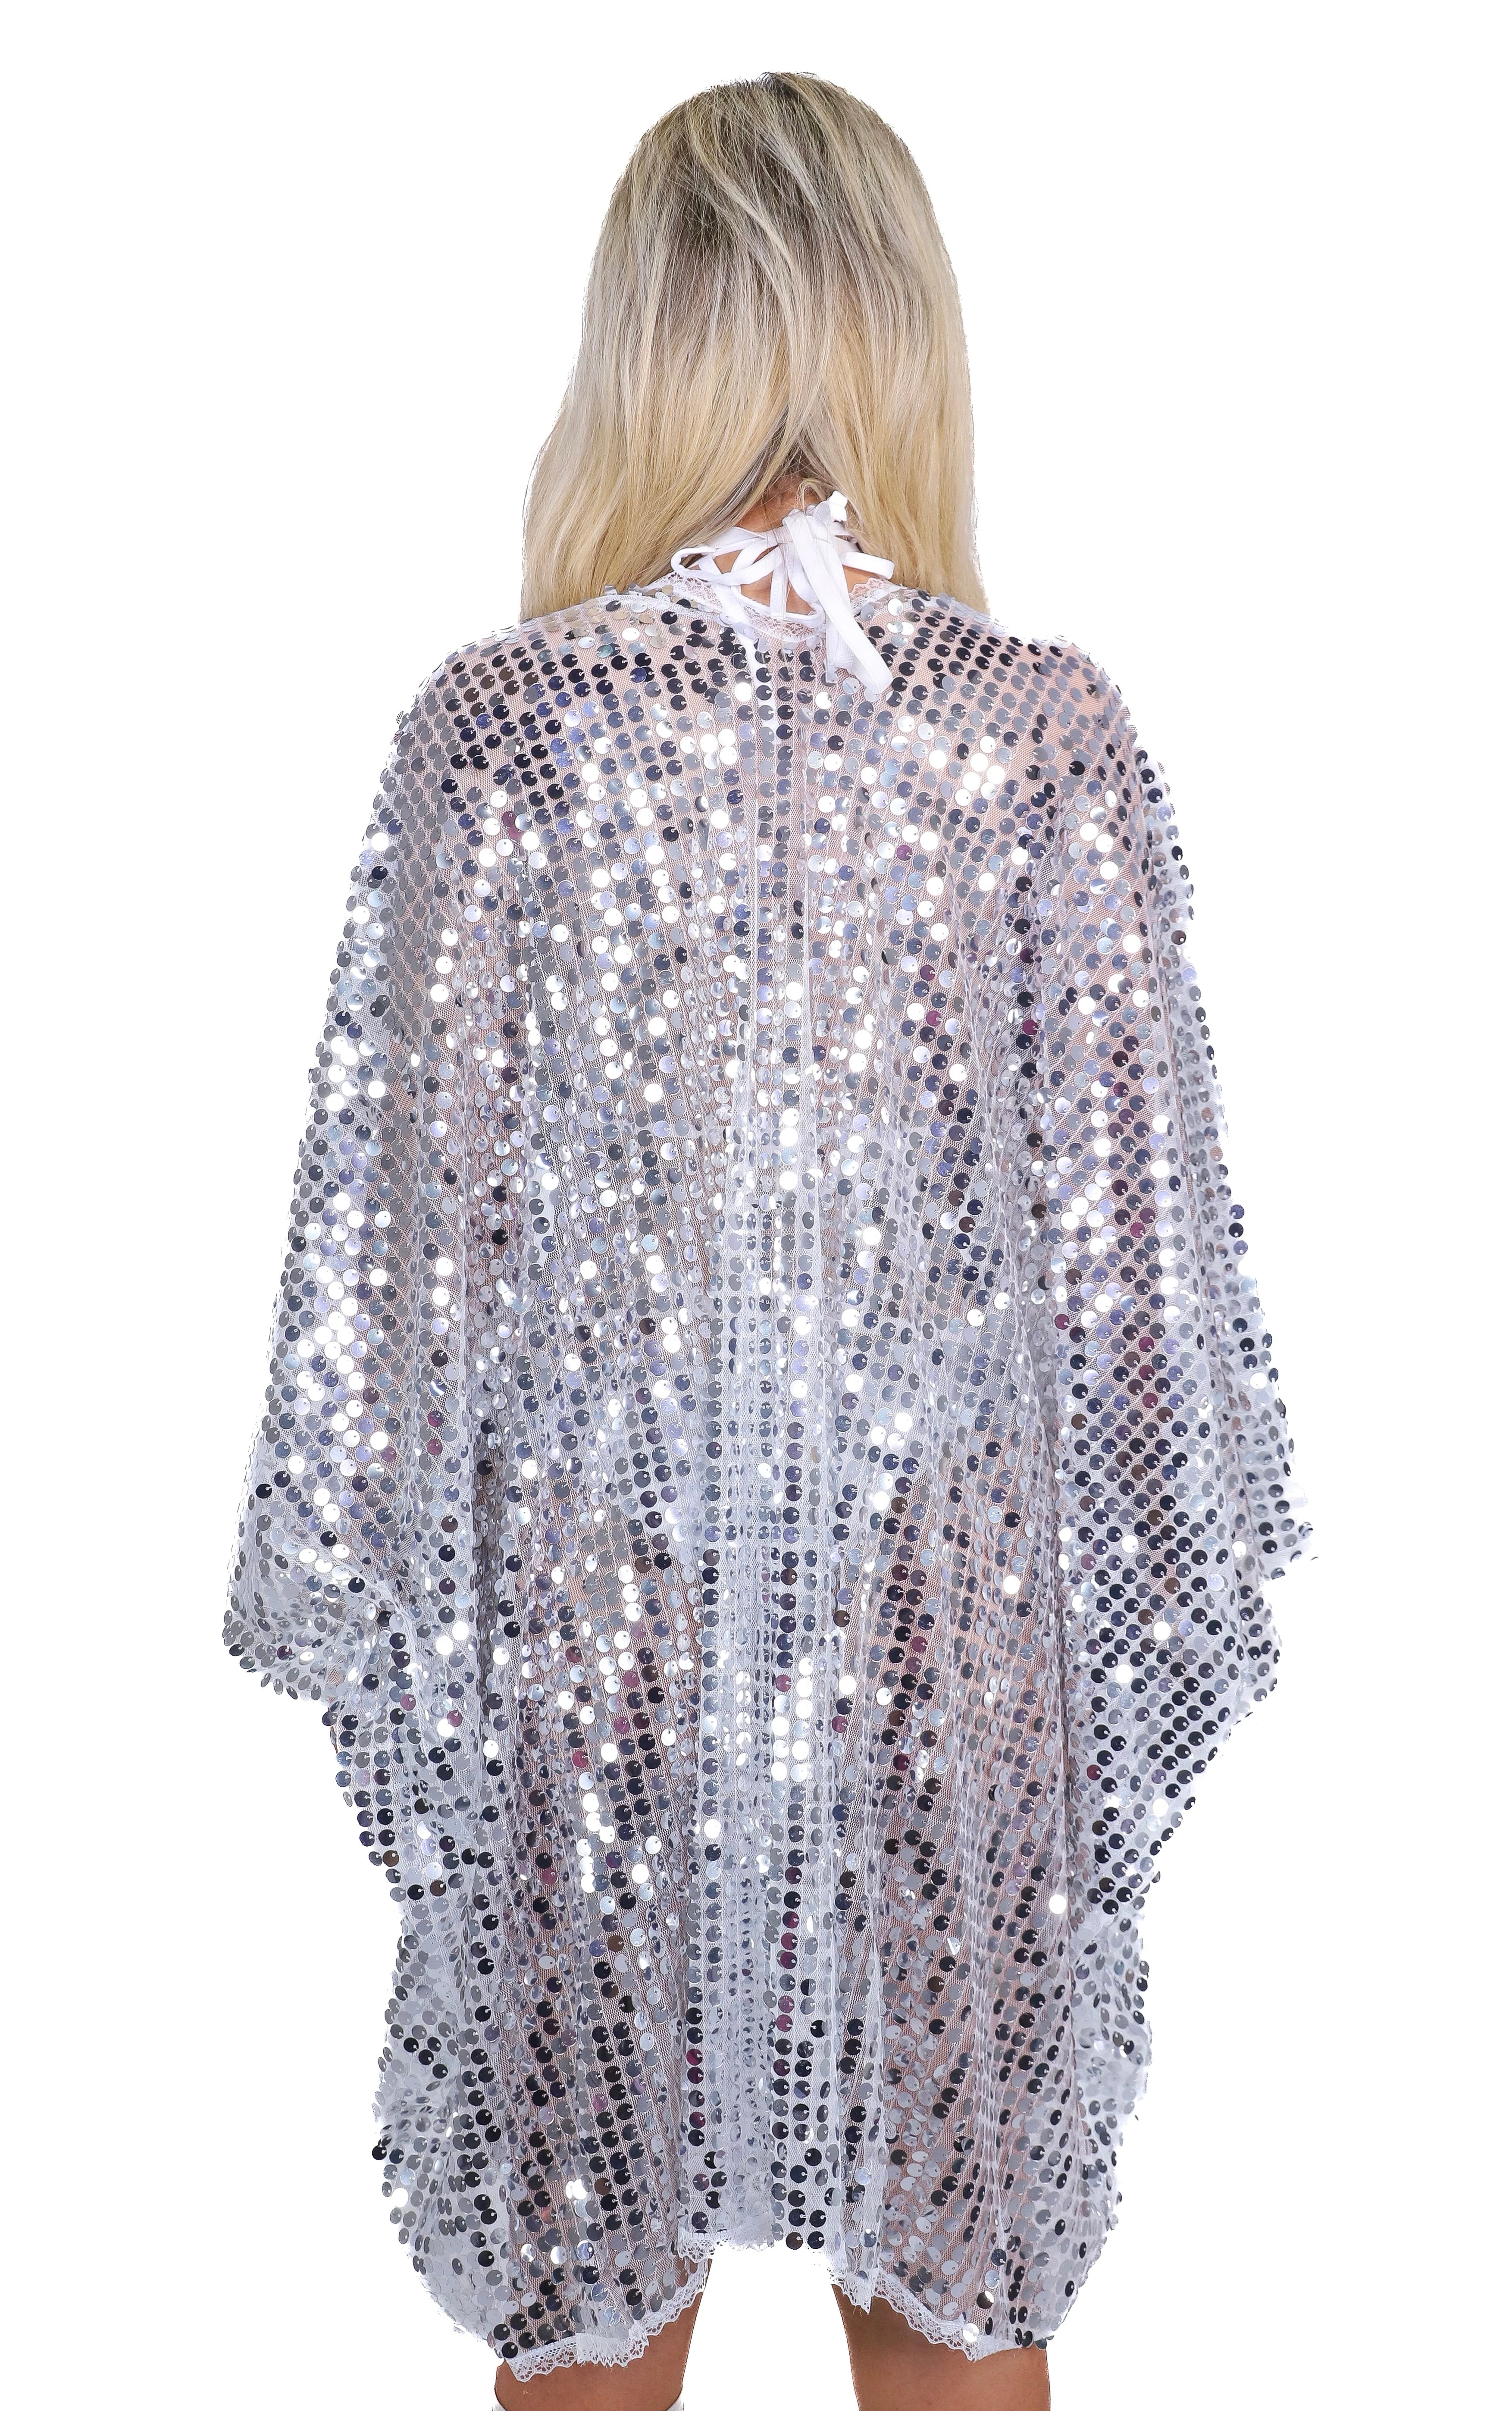 FULL OUTFIT- Silver Fantasy Disco (5 pcs)